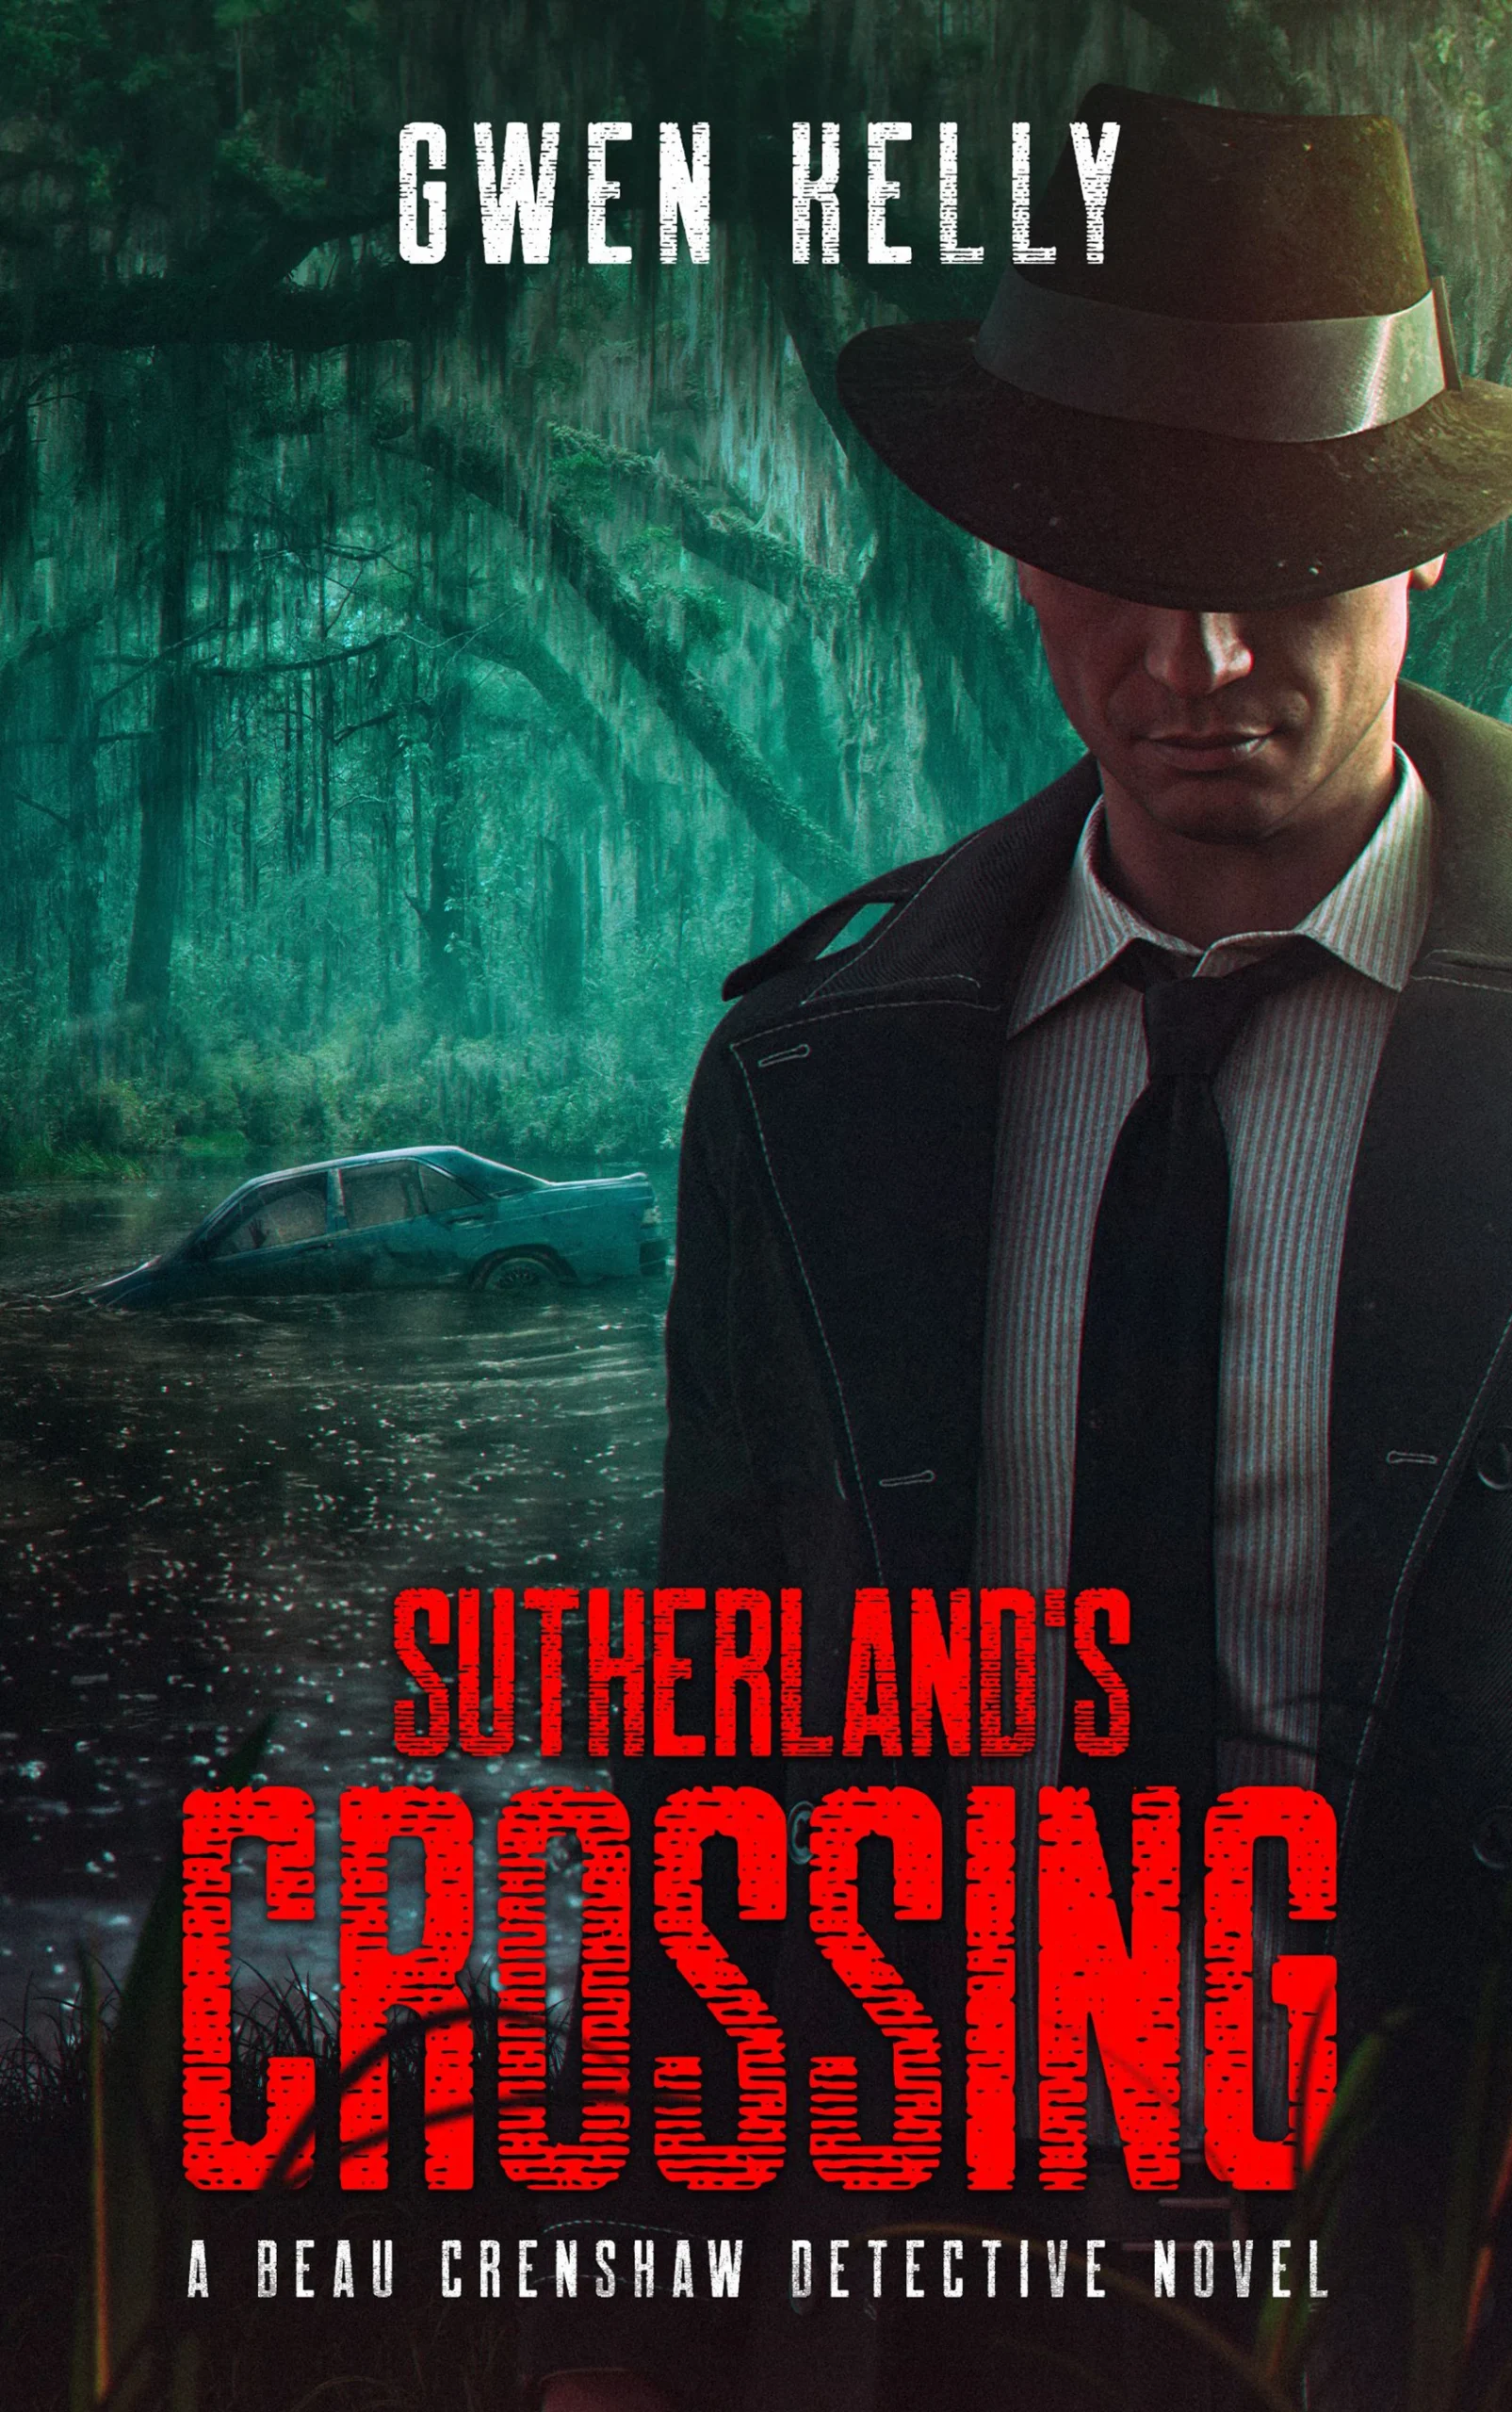 Sutherland’s Crossing – A Beau Crenshaw Detective Novel